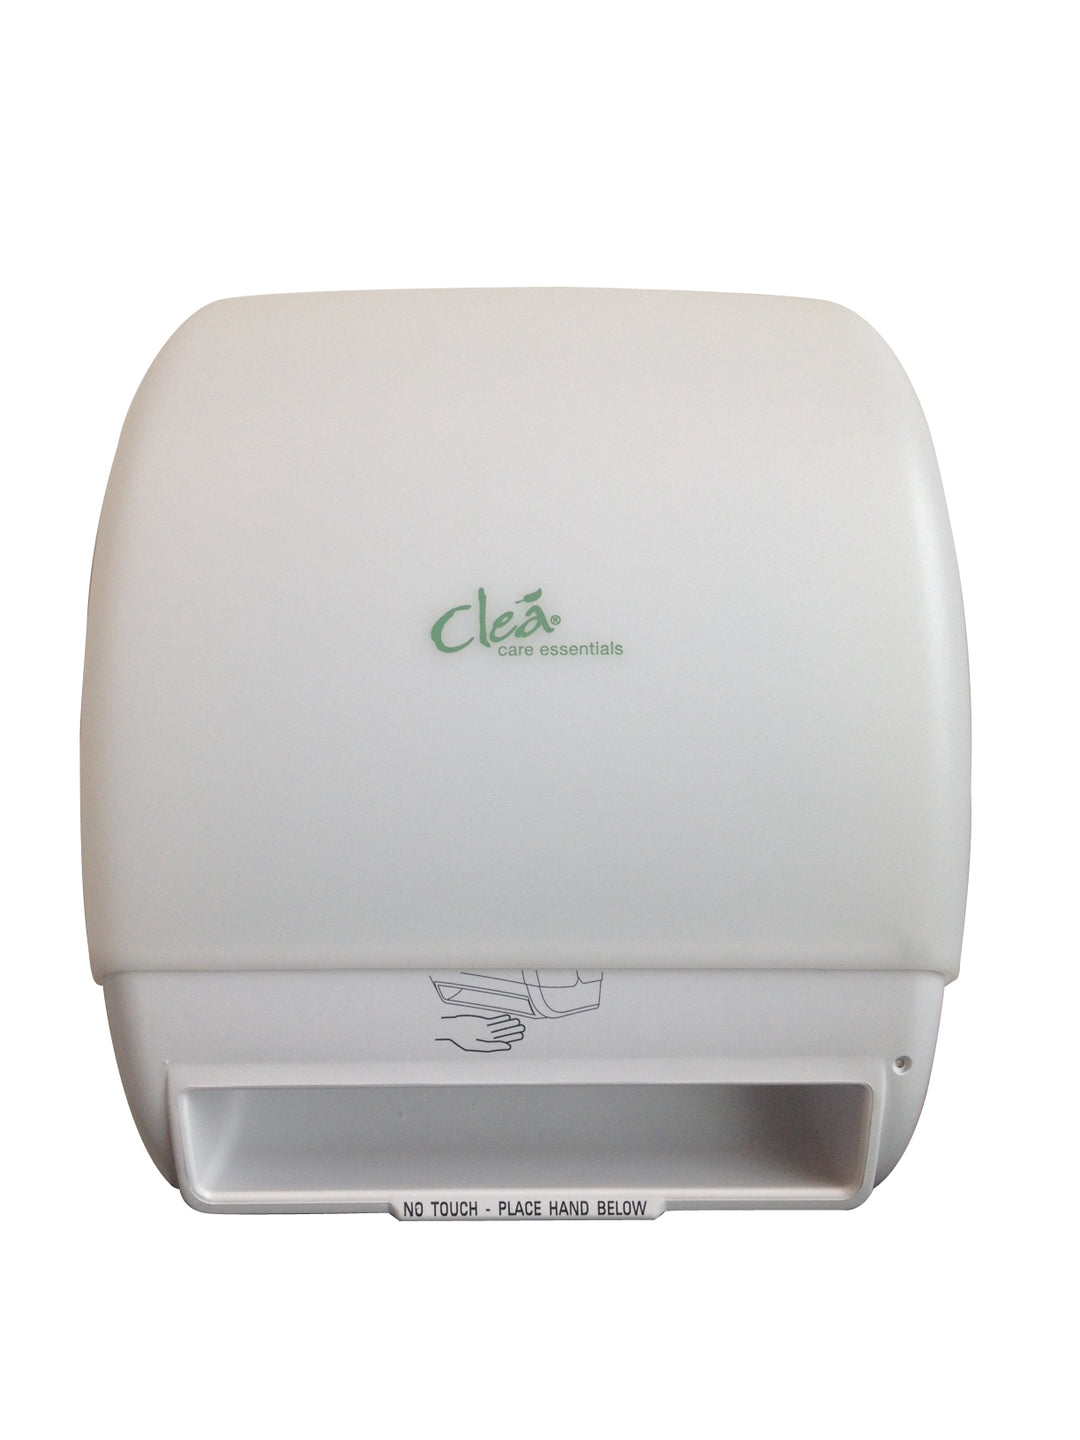 Clea Electronic Hand Towel Dispenser, White